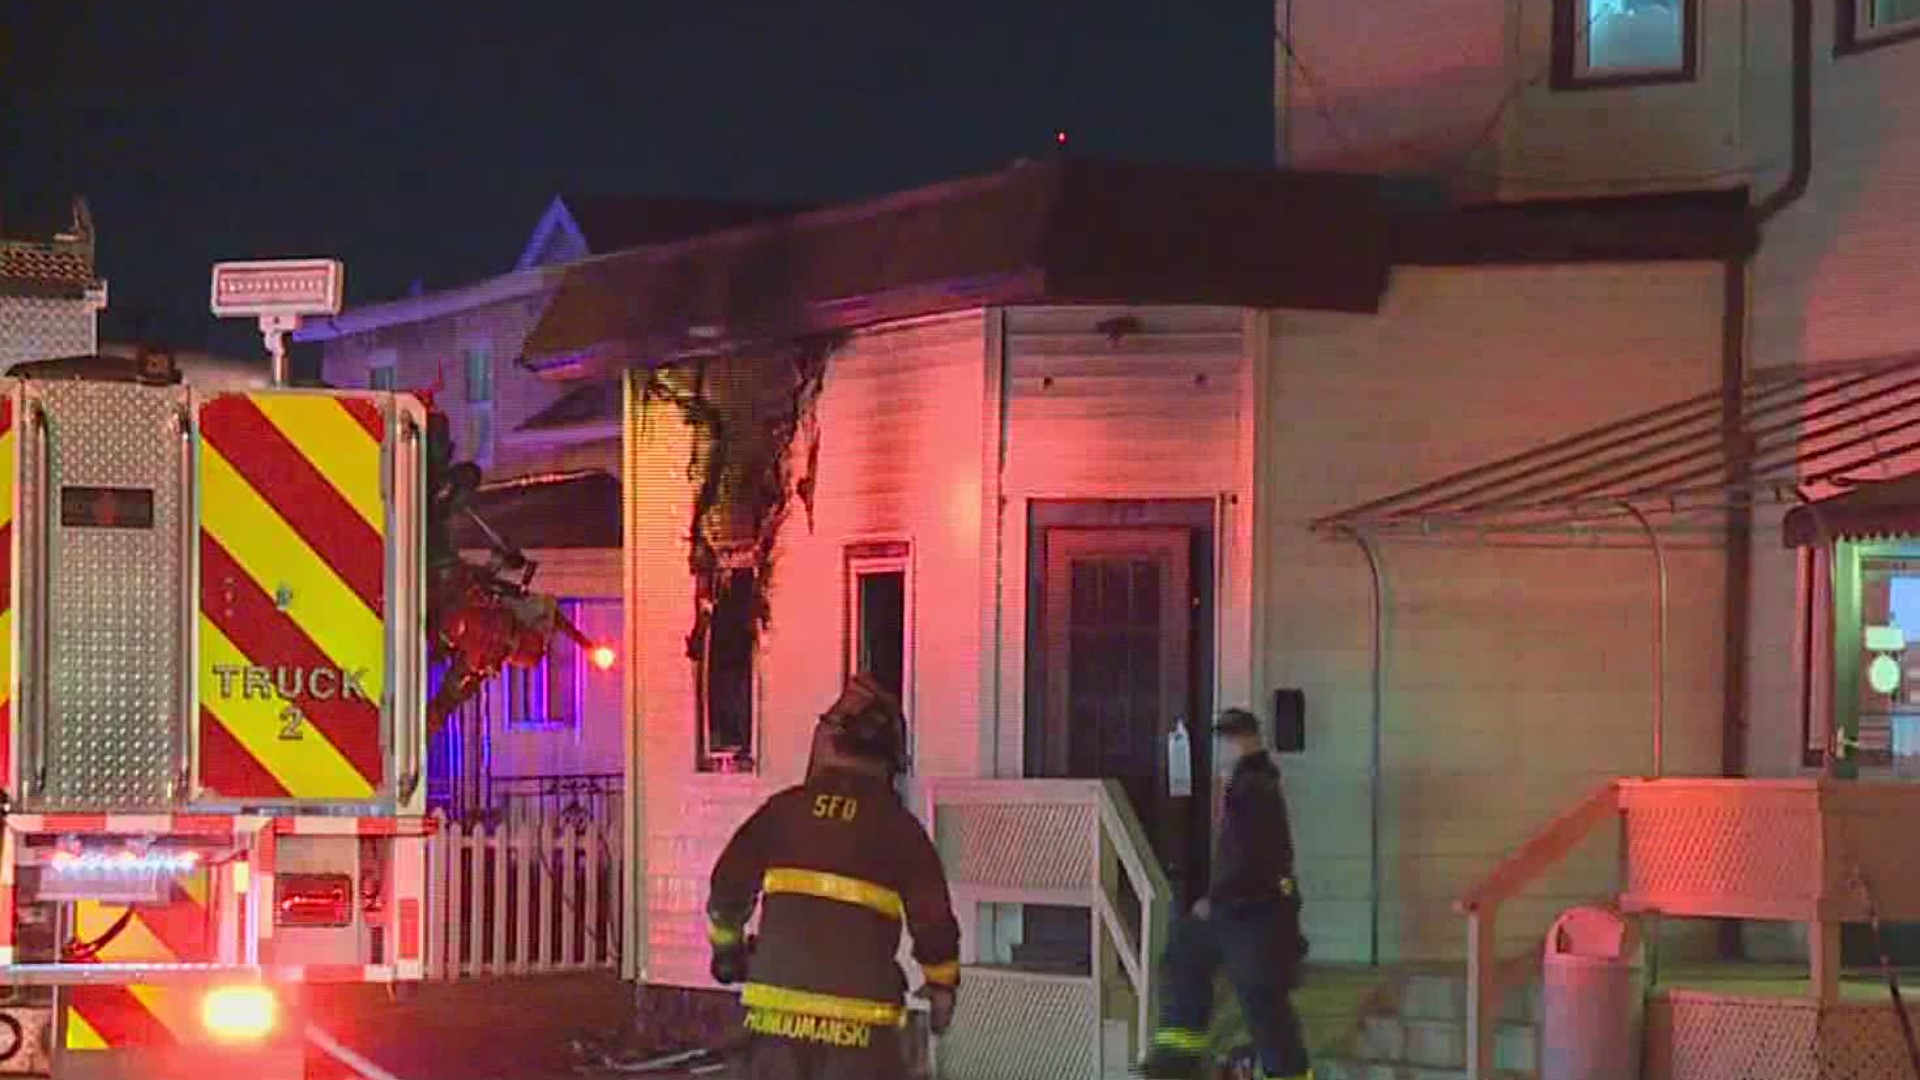 A man is dead after a fire Tuesday morning in Scranton.